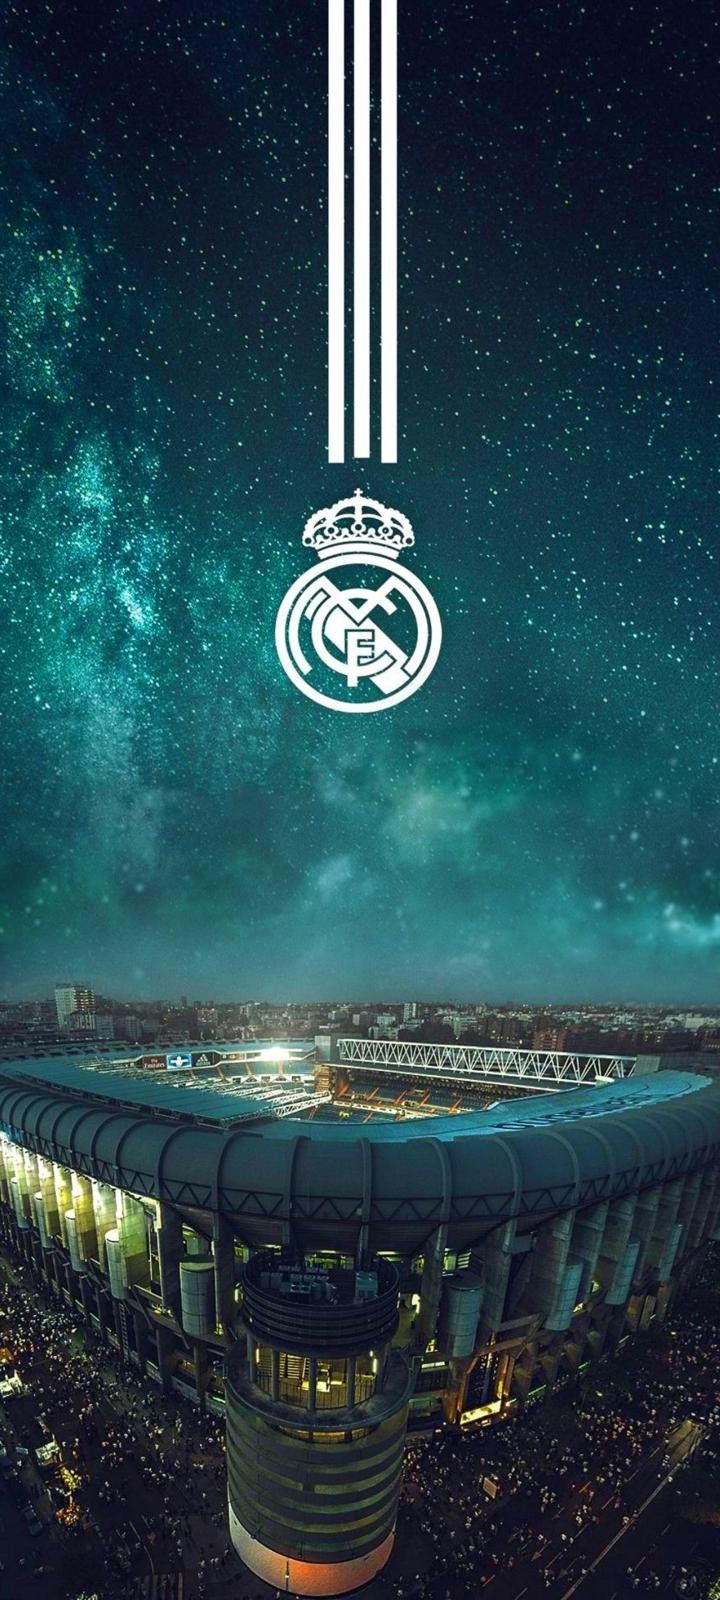 Real Madrid Wallpaper | Real madrid wallpapers, Real madrid pictures, Madrid wal